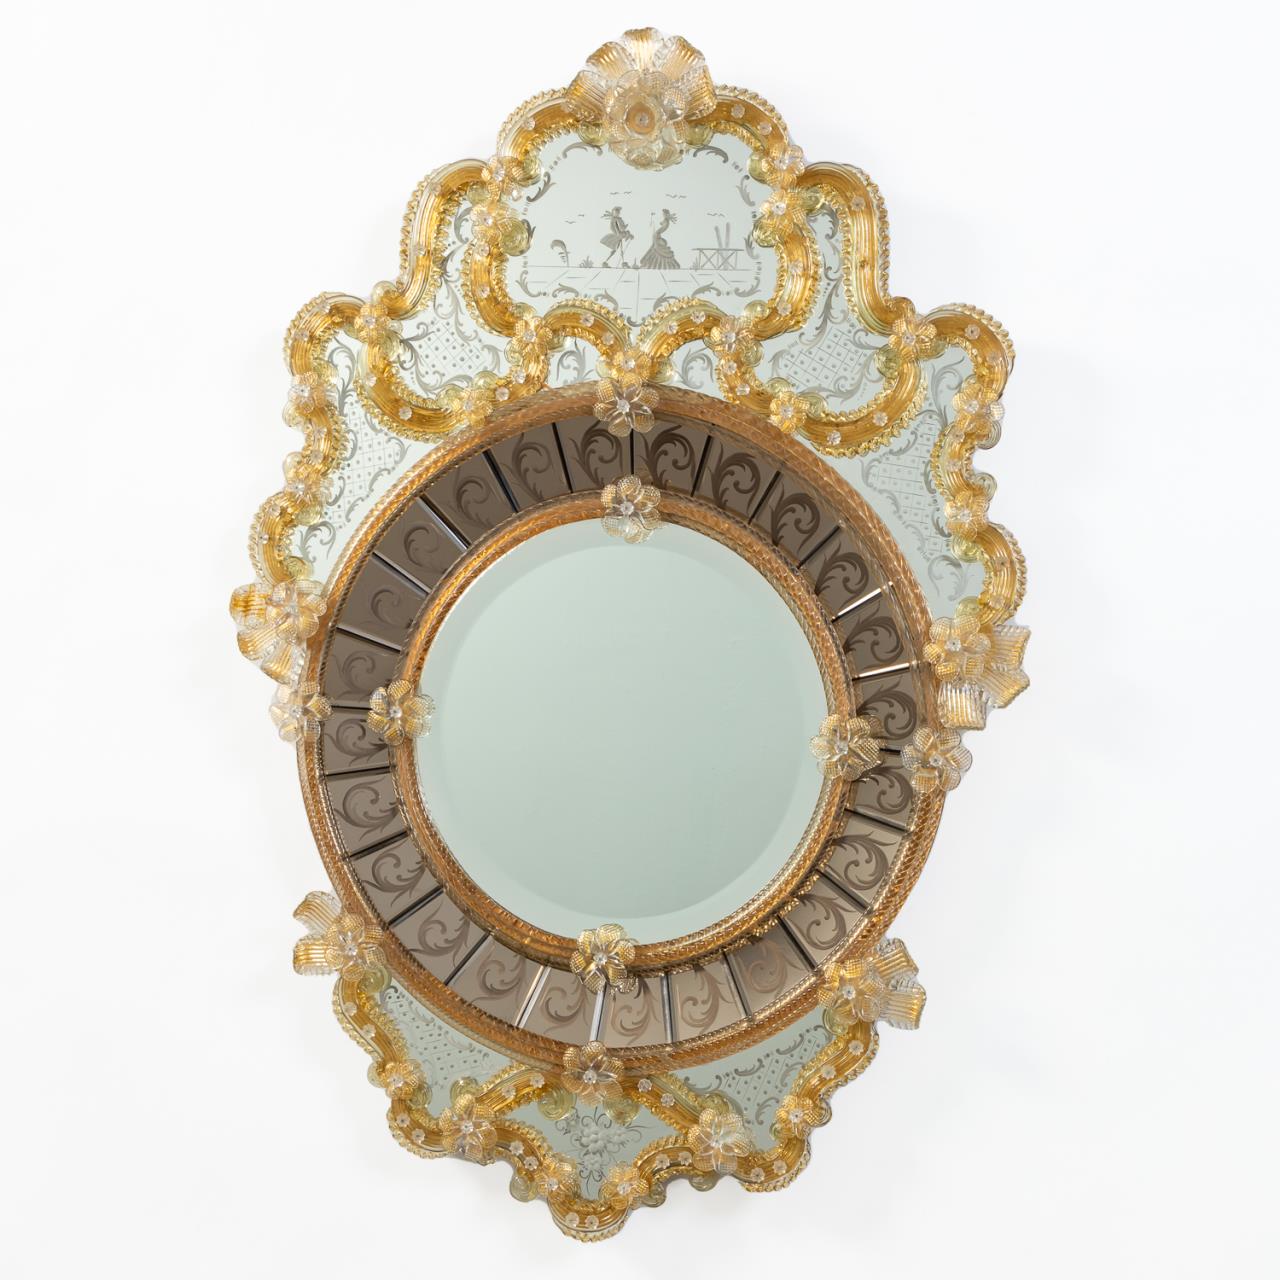 VENETIAN MIRROR WITH ETCHED COURTING 359577